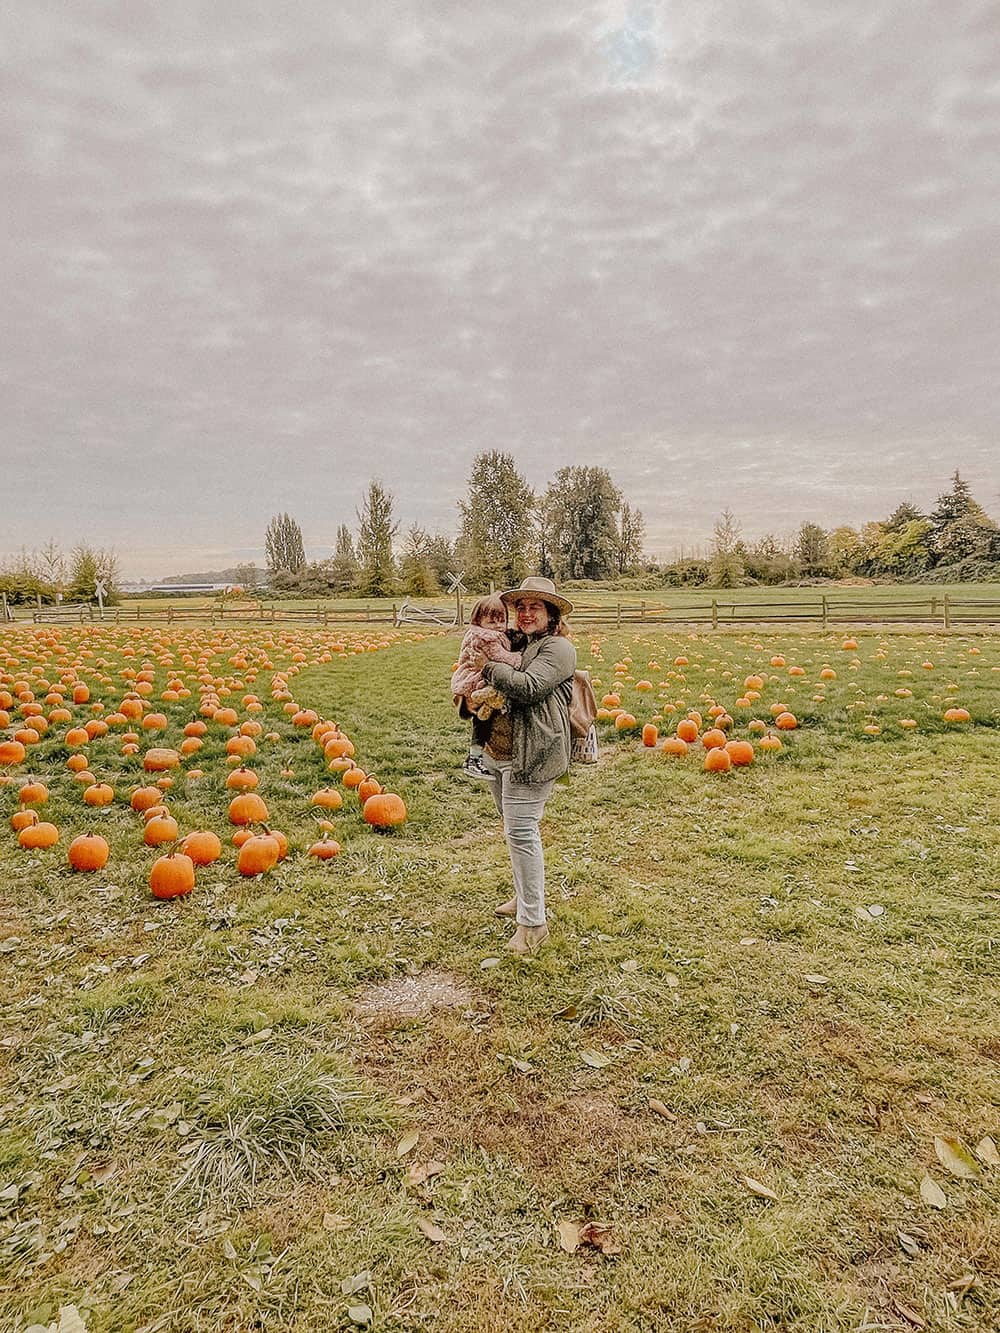 The Best Day at Richmond Country Farms Pumpkin Patch